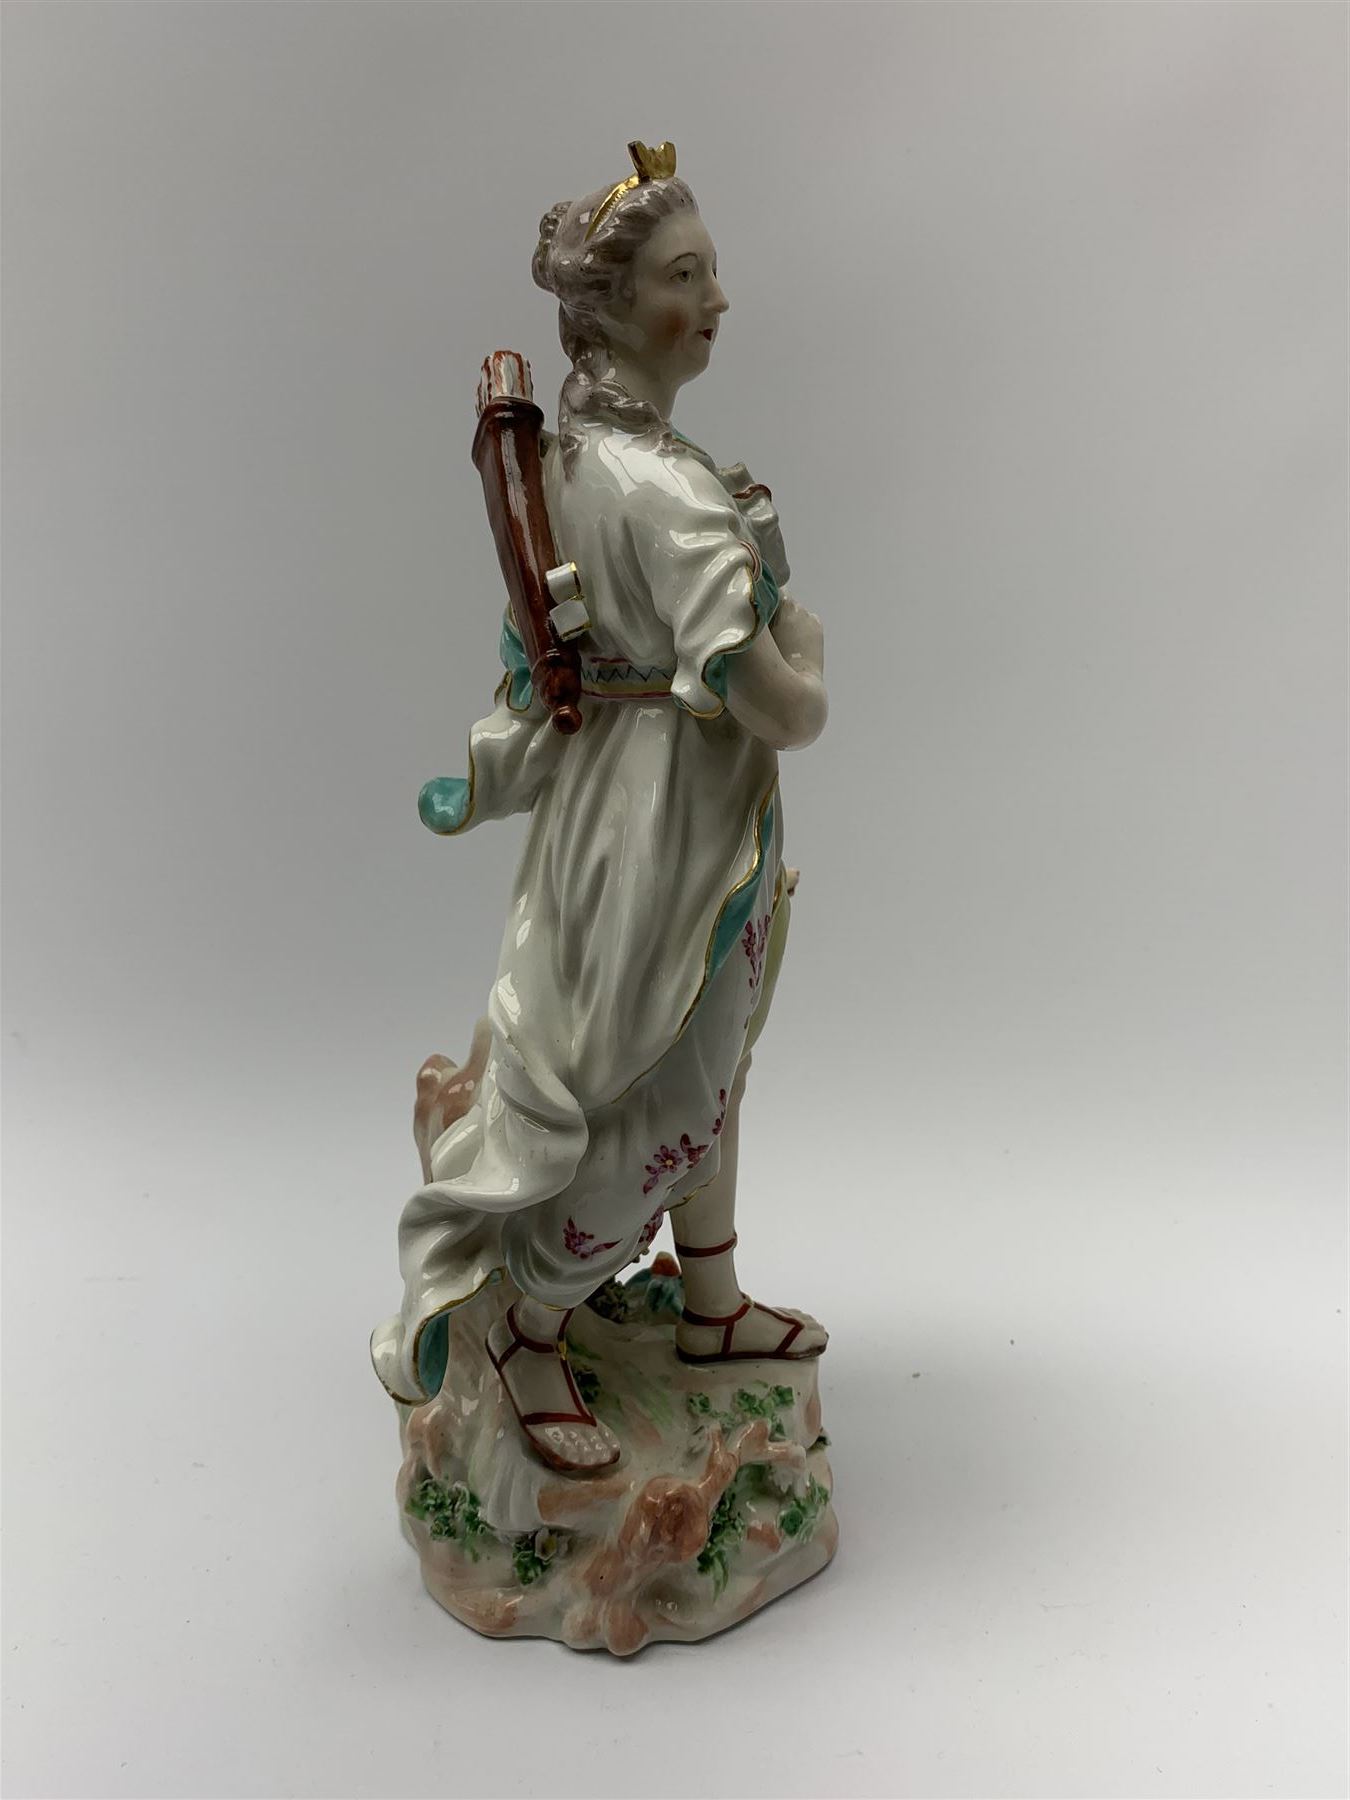 Mid 18th century Derby porcelain figure modelled as Dianna the Huntress - Image 6 of 9